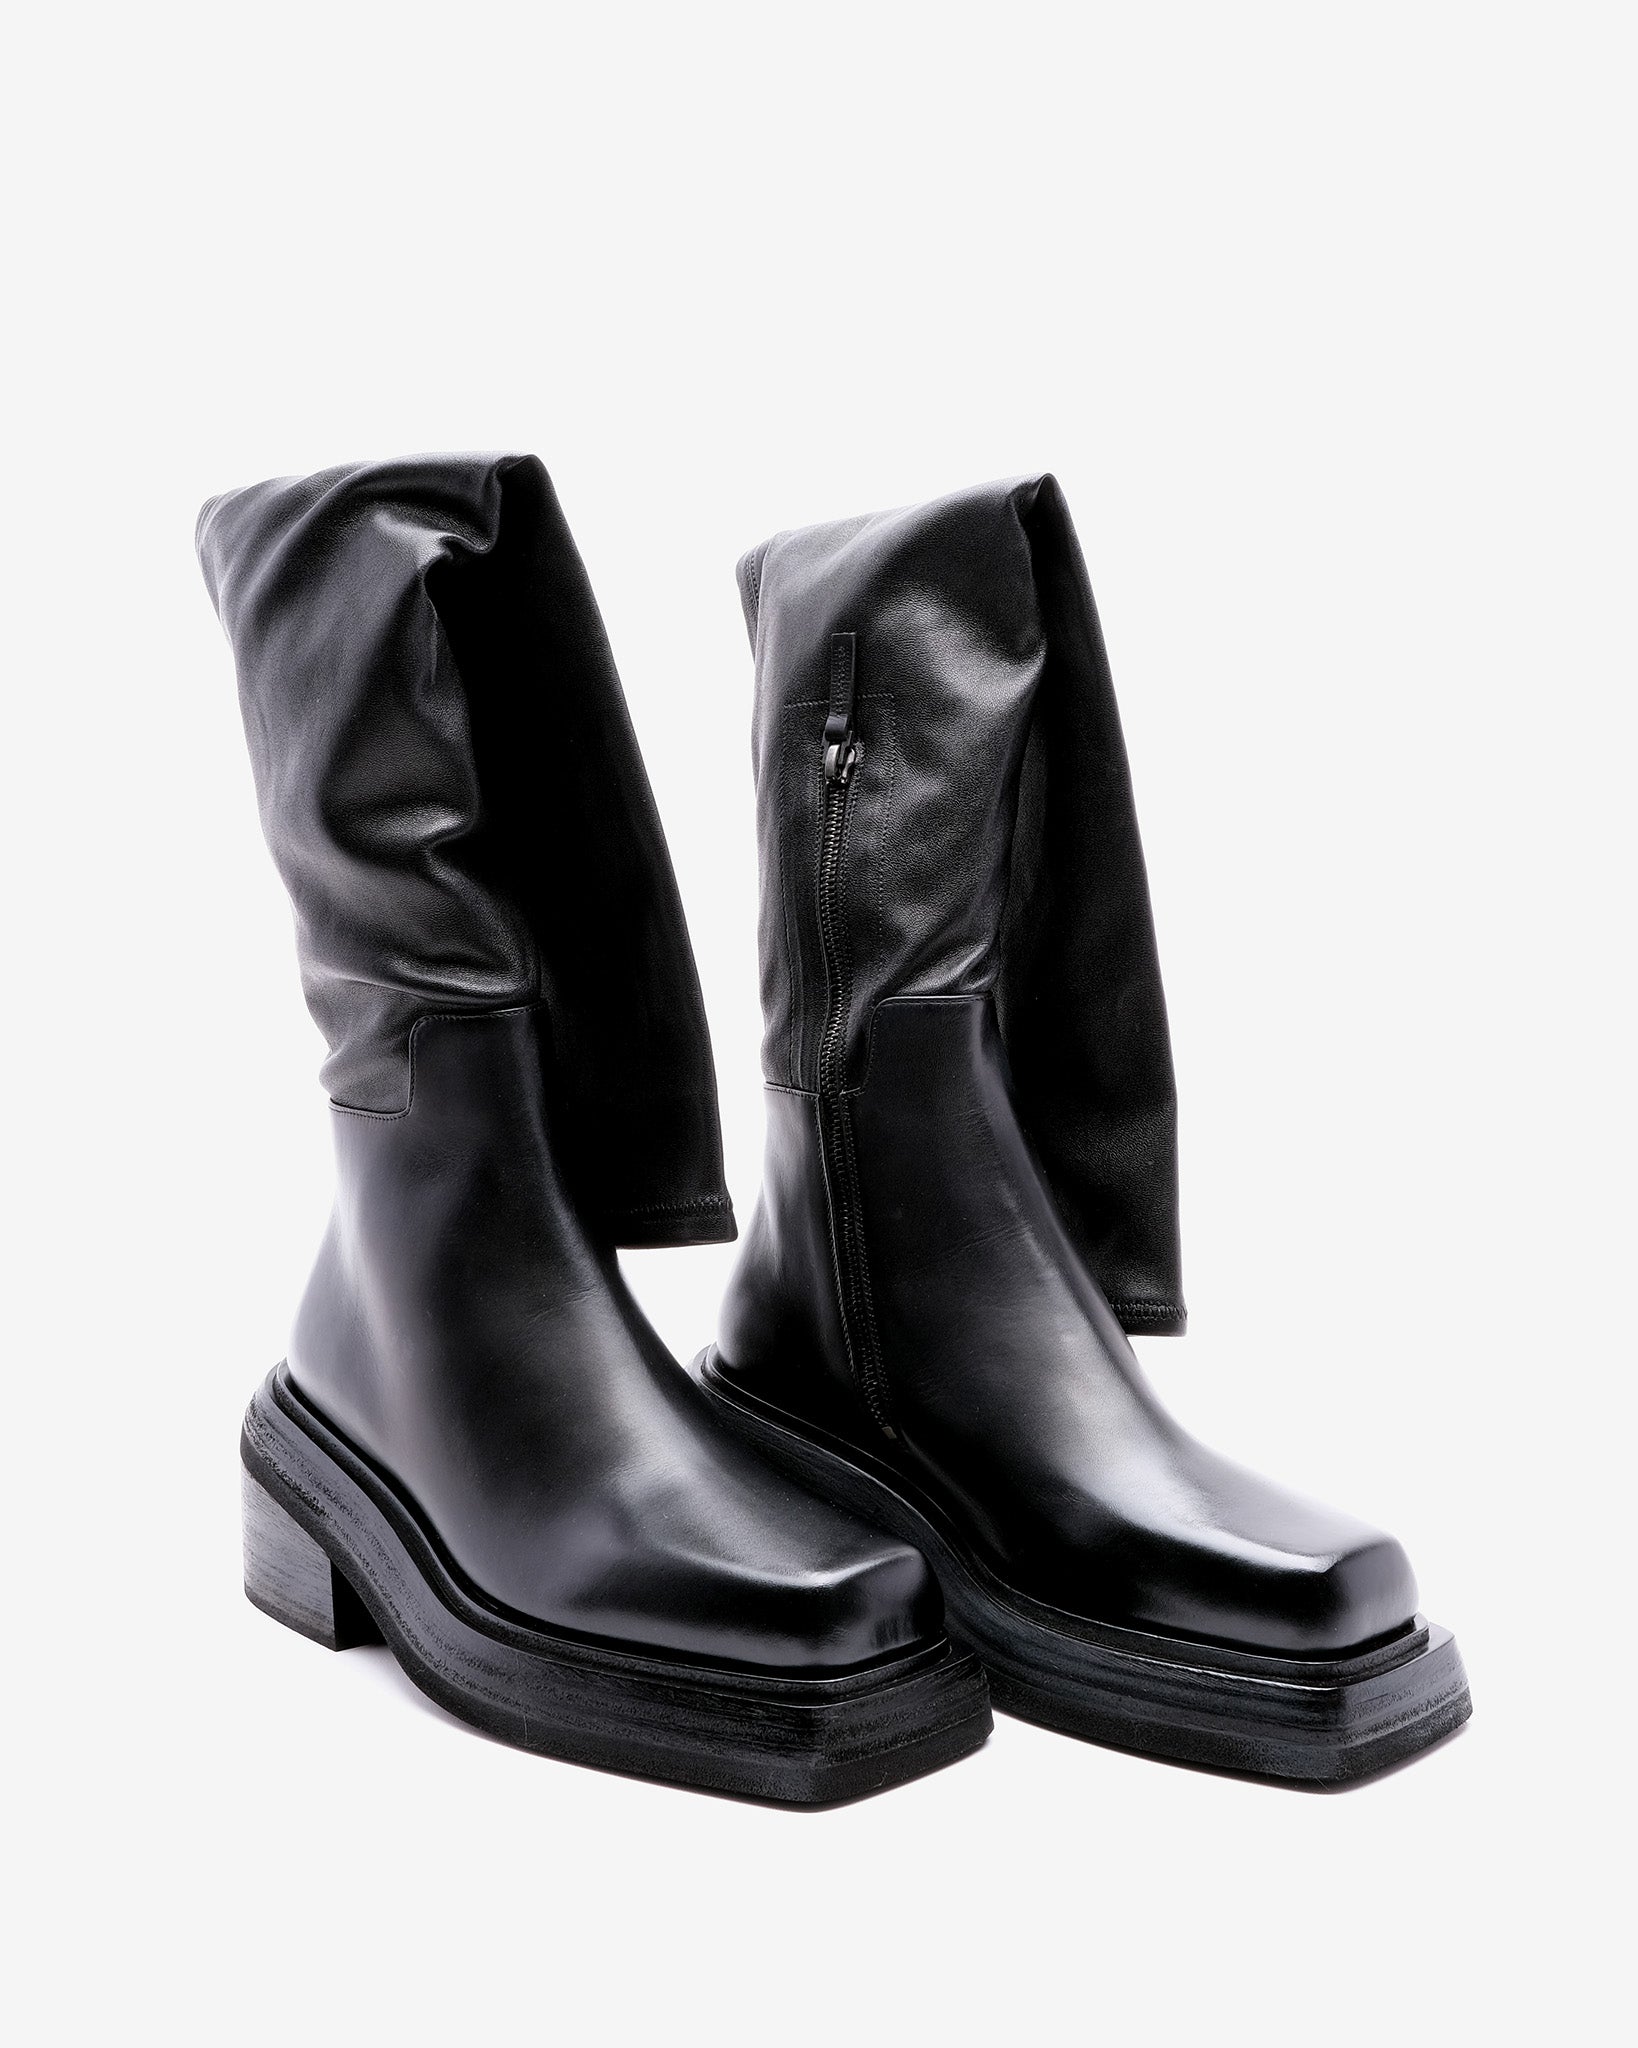 Cassetto MW6562 Black Leather Boots